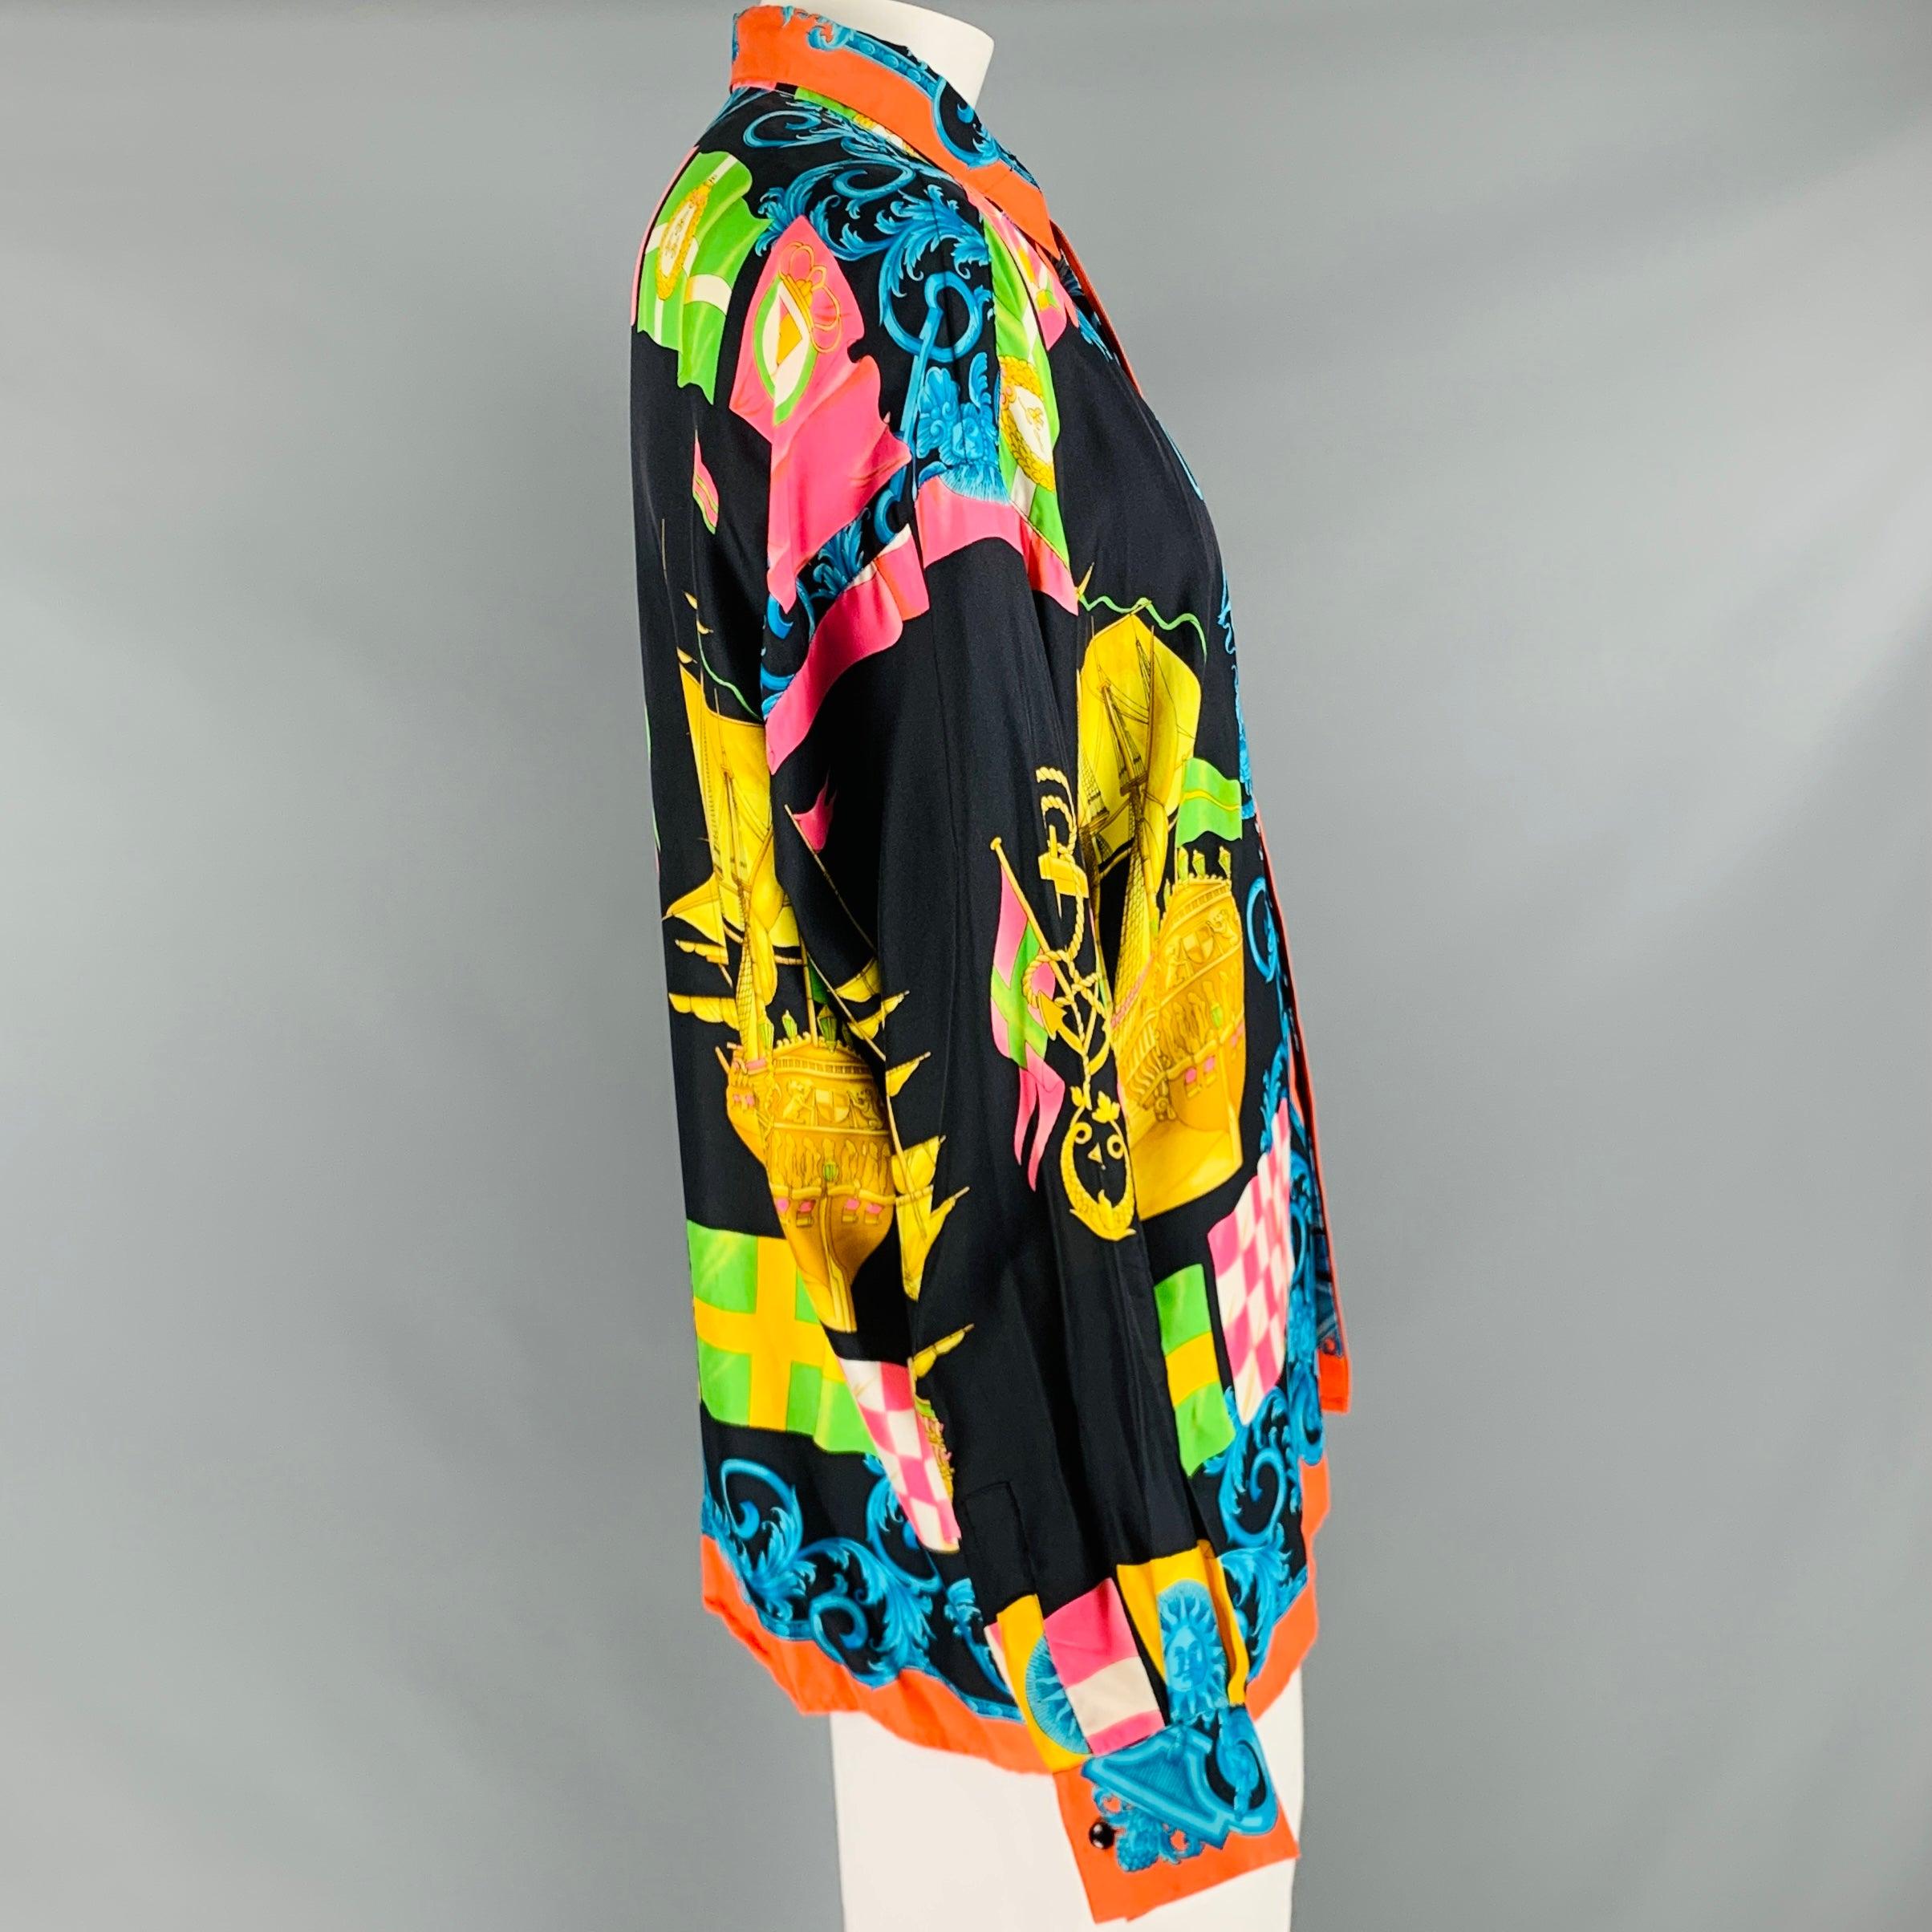 Vintage GIANNI VERSACE long sleeve shirt
in a multi-color silk fabric featuring a vibrant nautical print, button-down collar, and hidden button closure. Made in Italy.Good Pre-Owned Condition. Moderate signs of wear and marks on left sleeve, as is.